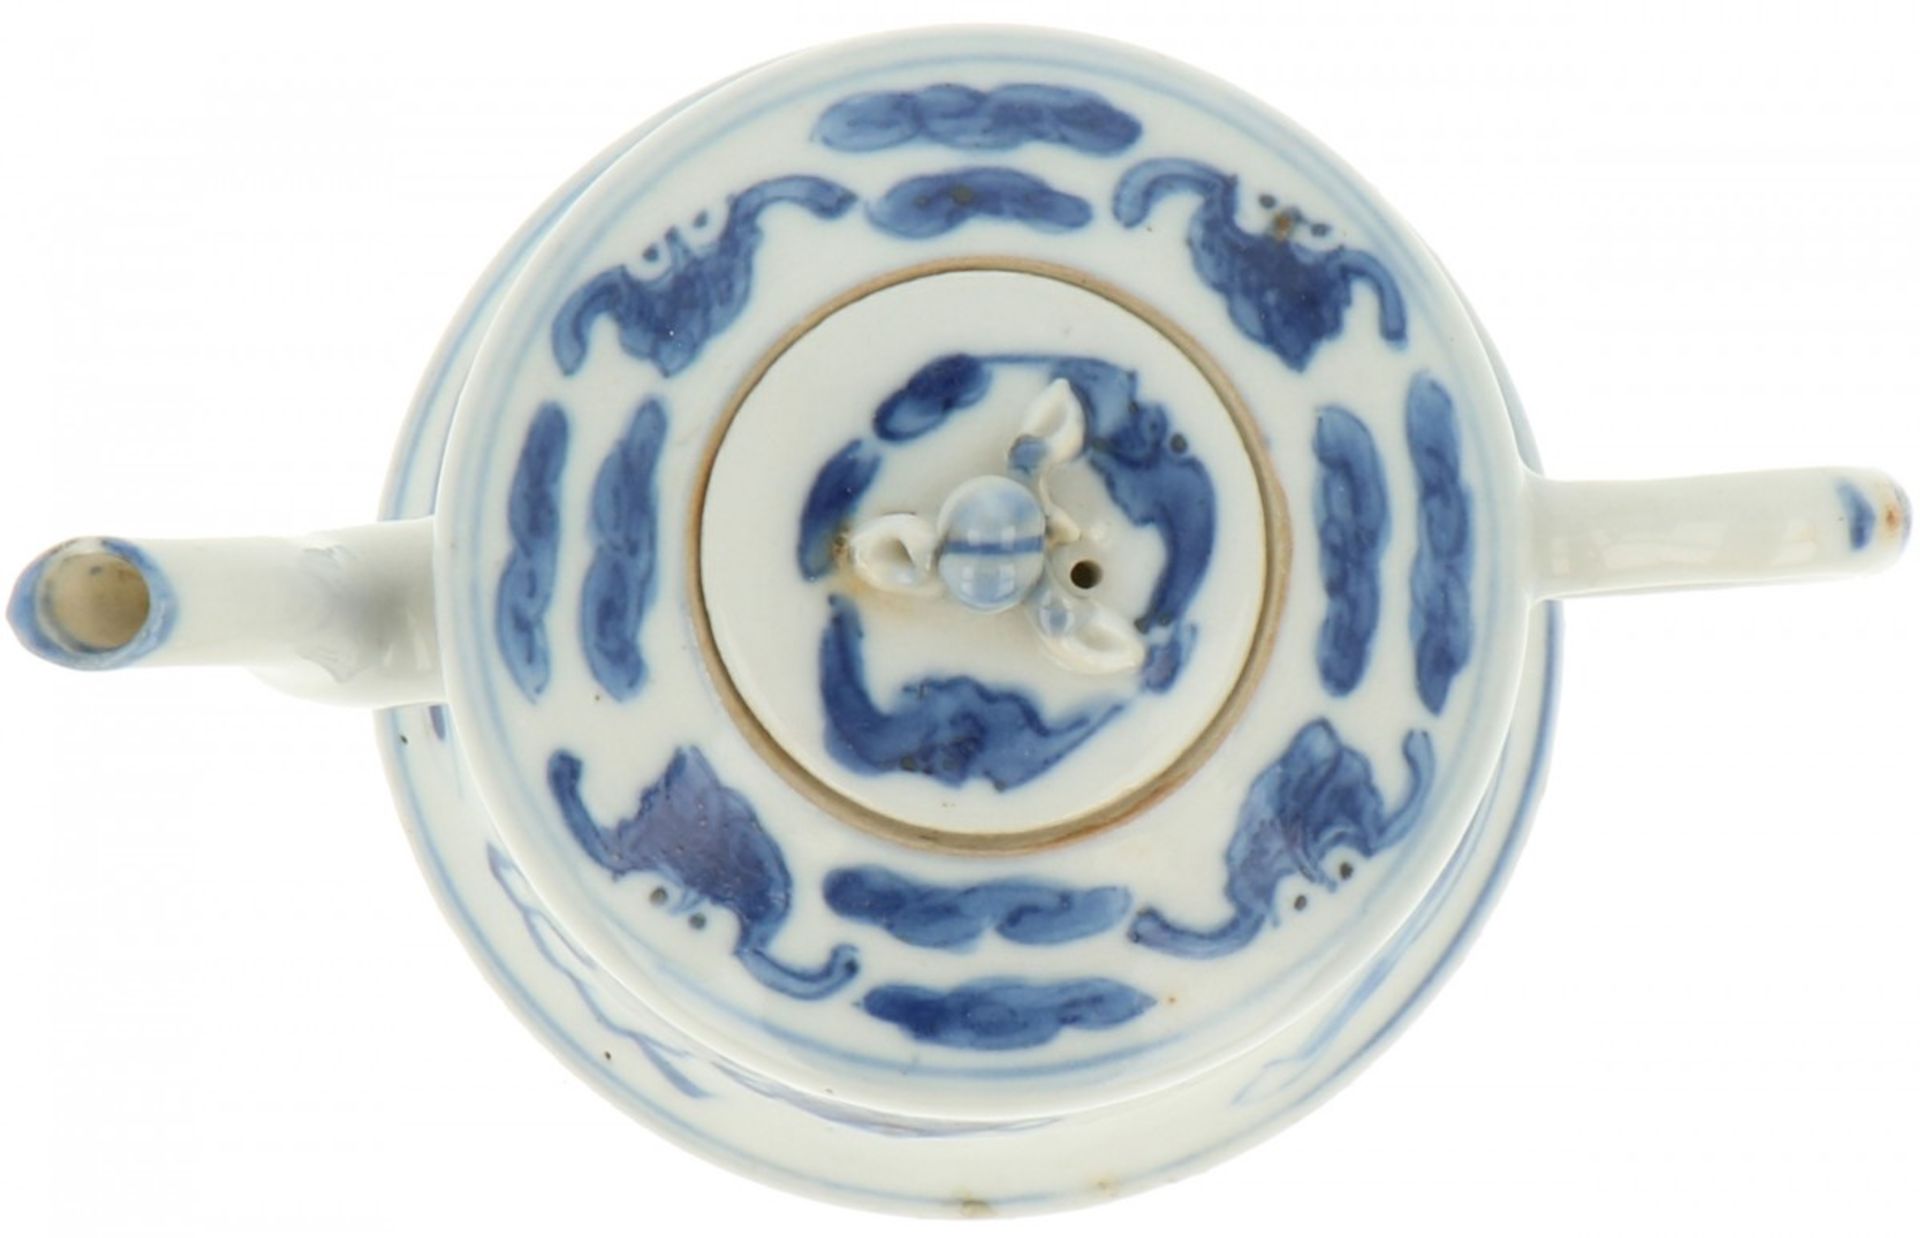 A porcelain teapot with Foo-dogs décor, marked Kangxi. China, 19th century. - Image 5 of 7